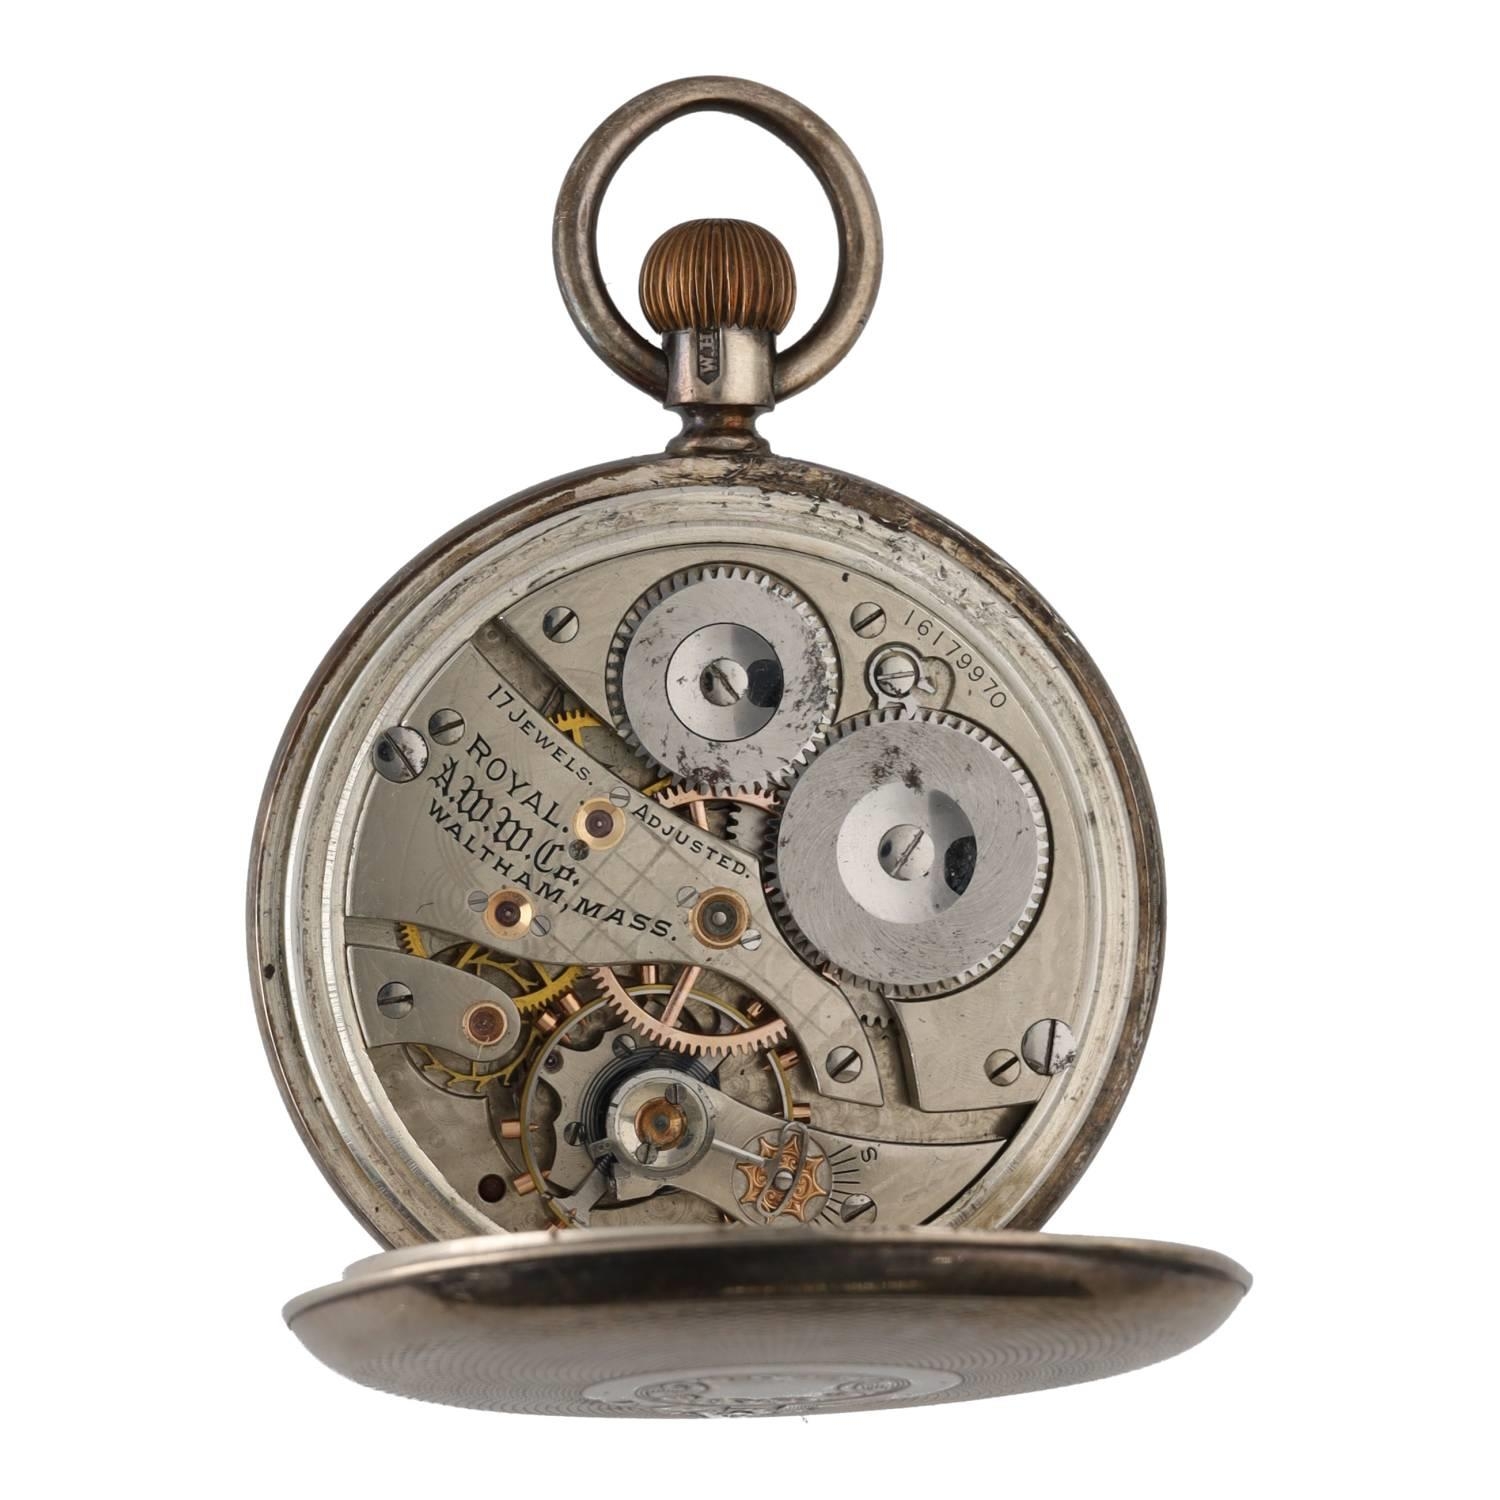 American Waltham 'Royal' silver lever pocket watch, circa 1907, serial no. 16179970, signed 17 jewel - Image 3 of 4